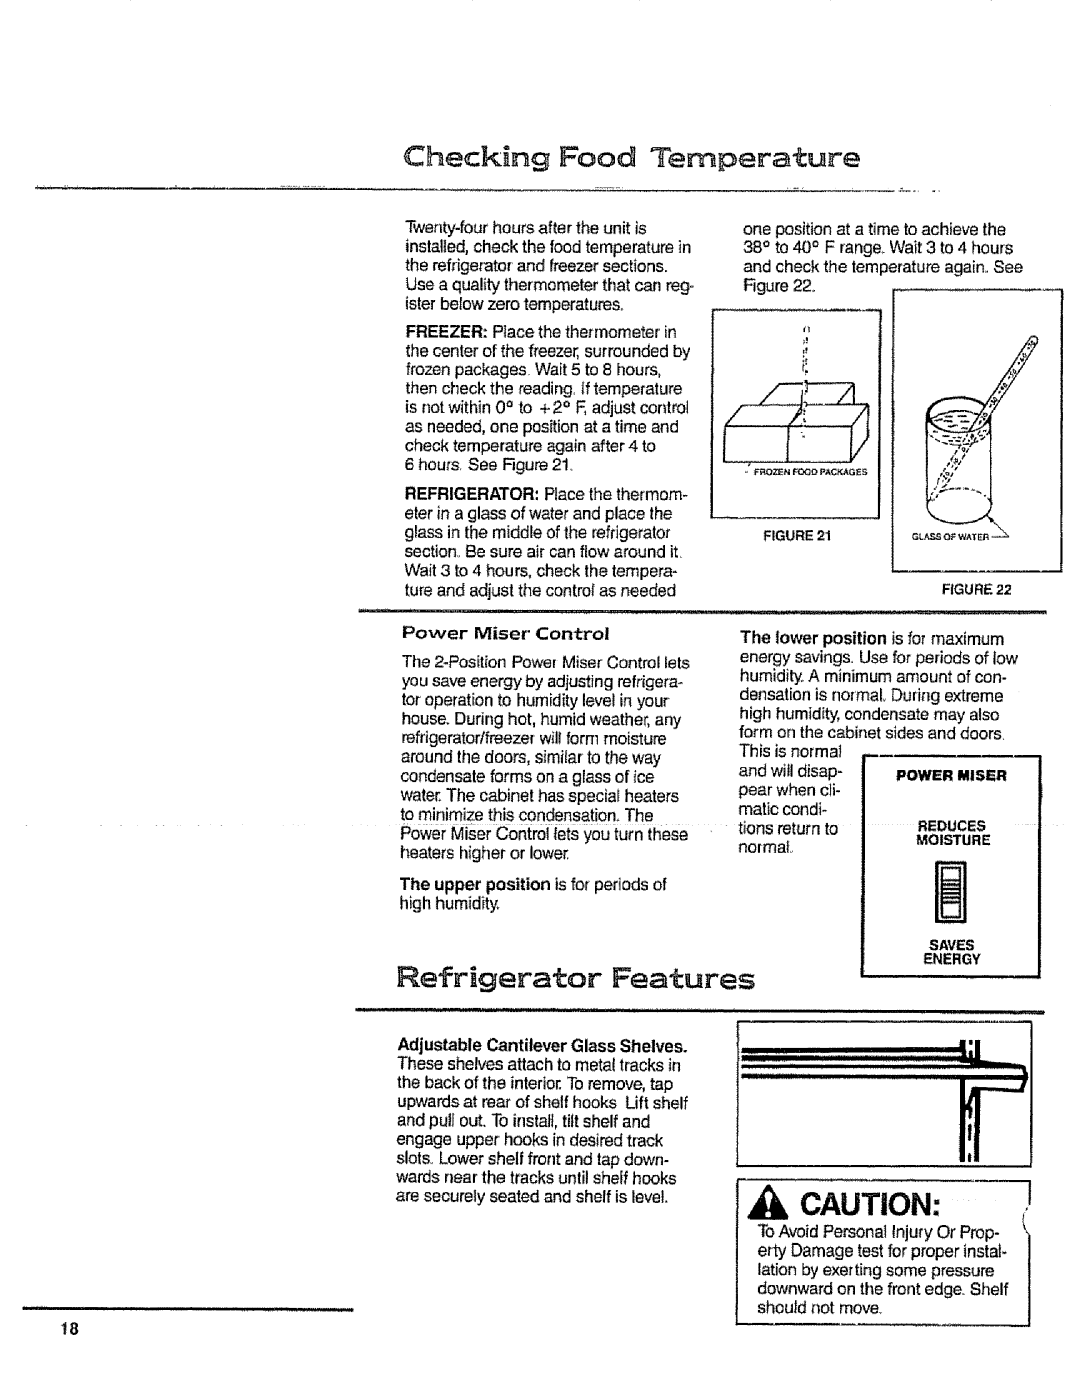 Sears 10062603 Checking Food Temperature, RefrigeratorFea±ures, Power Miser Control, The upper position is for periods of 